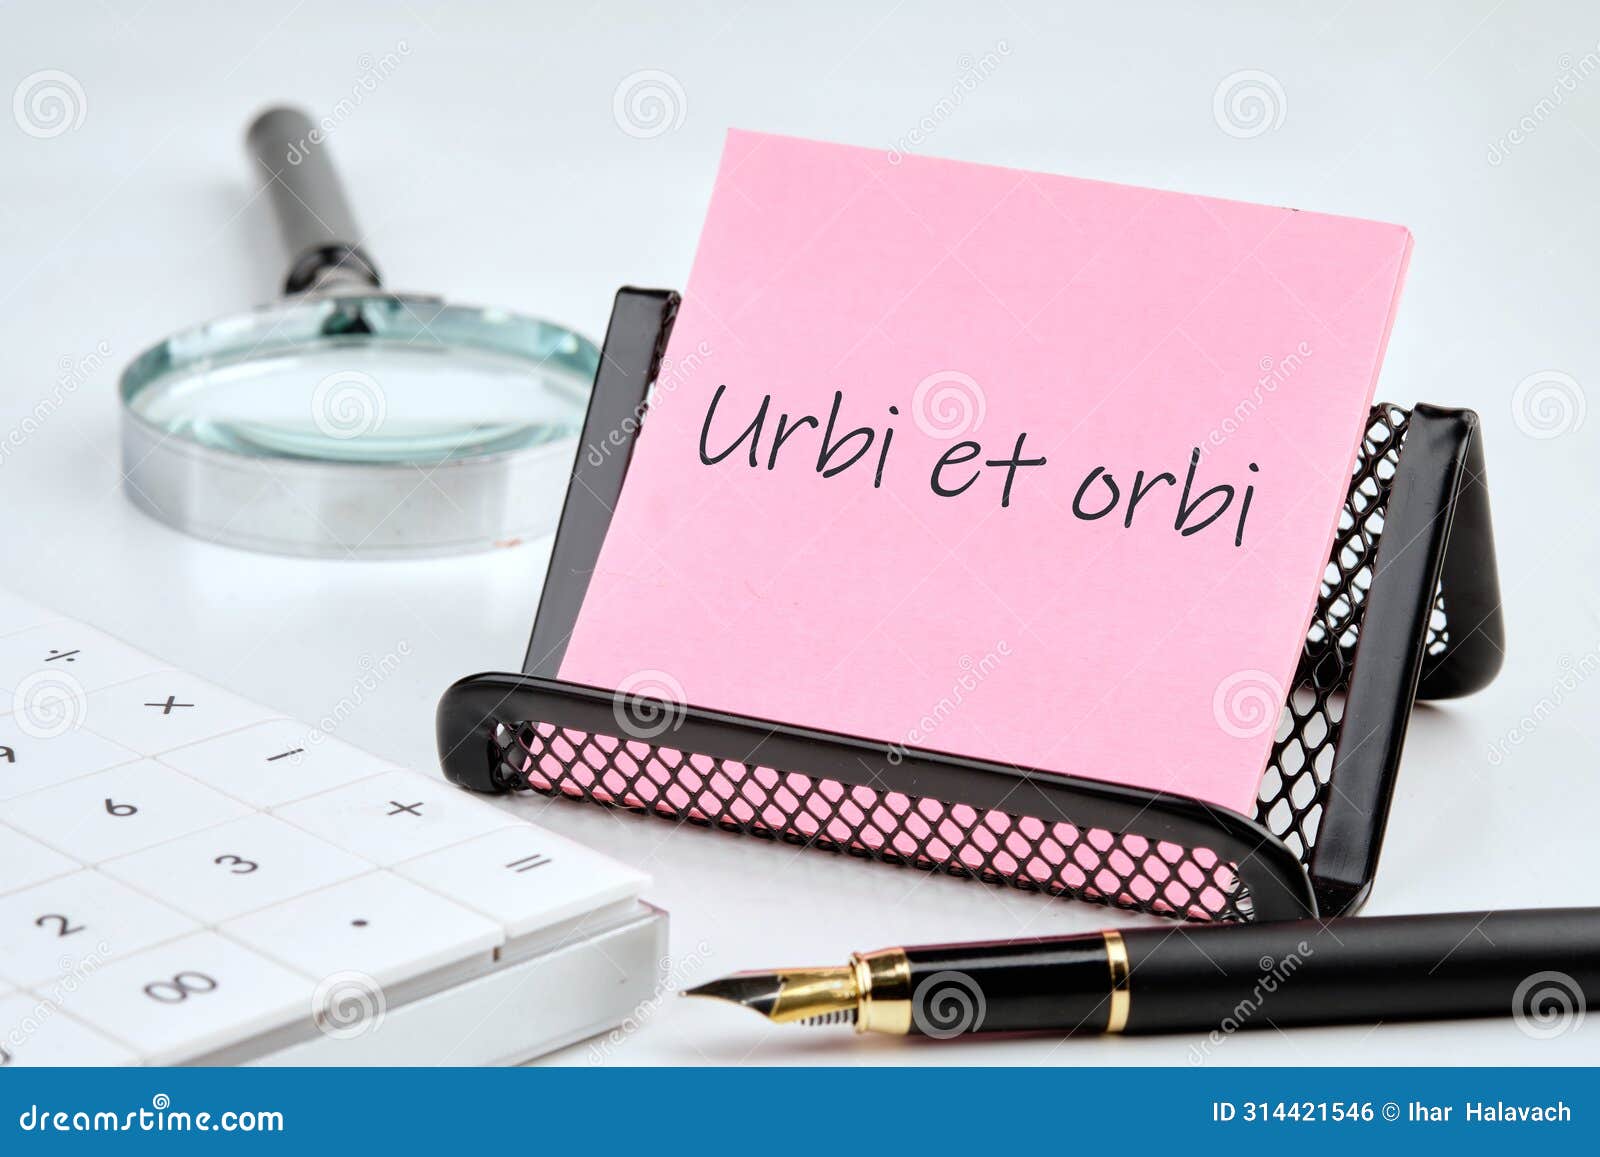 urbi et orbi is a latin saying that represents the formula of the solemn blessing